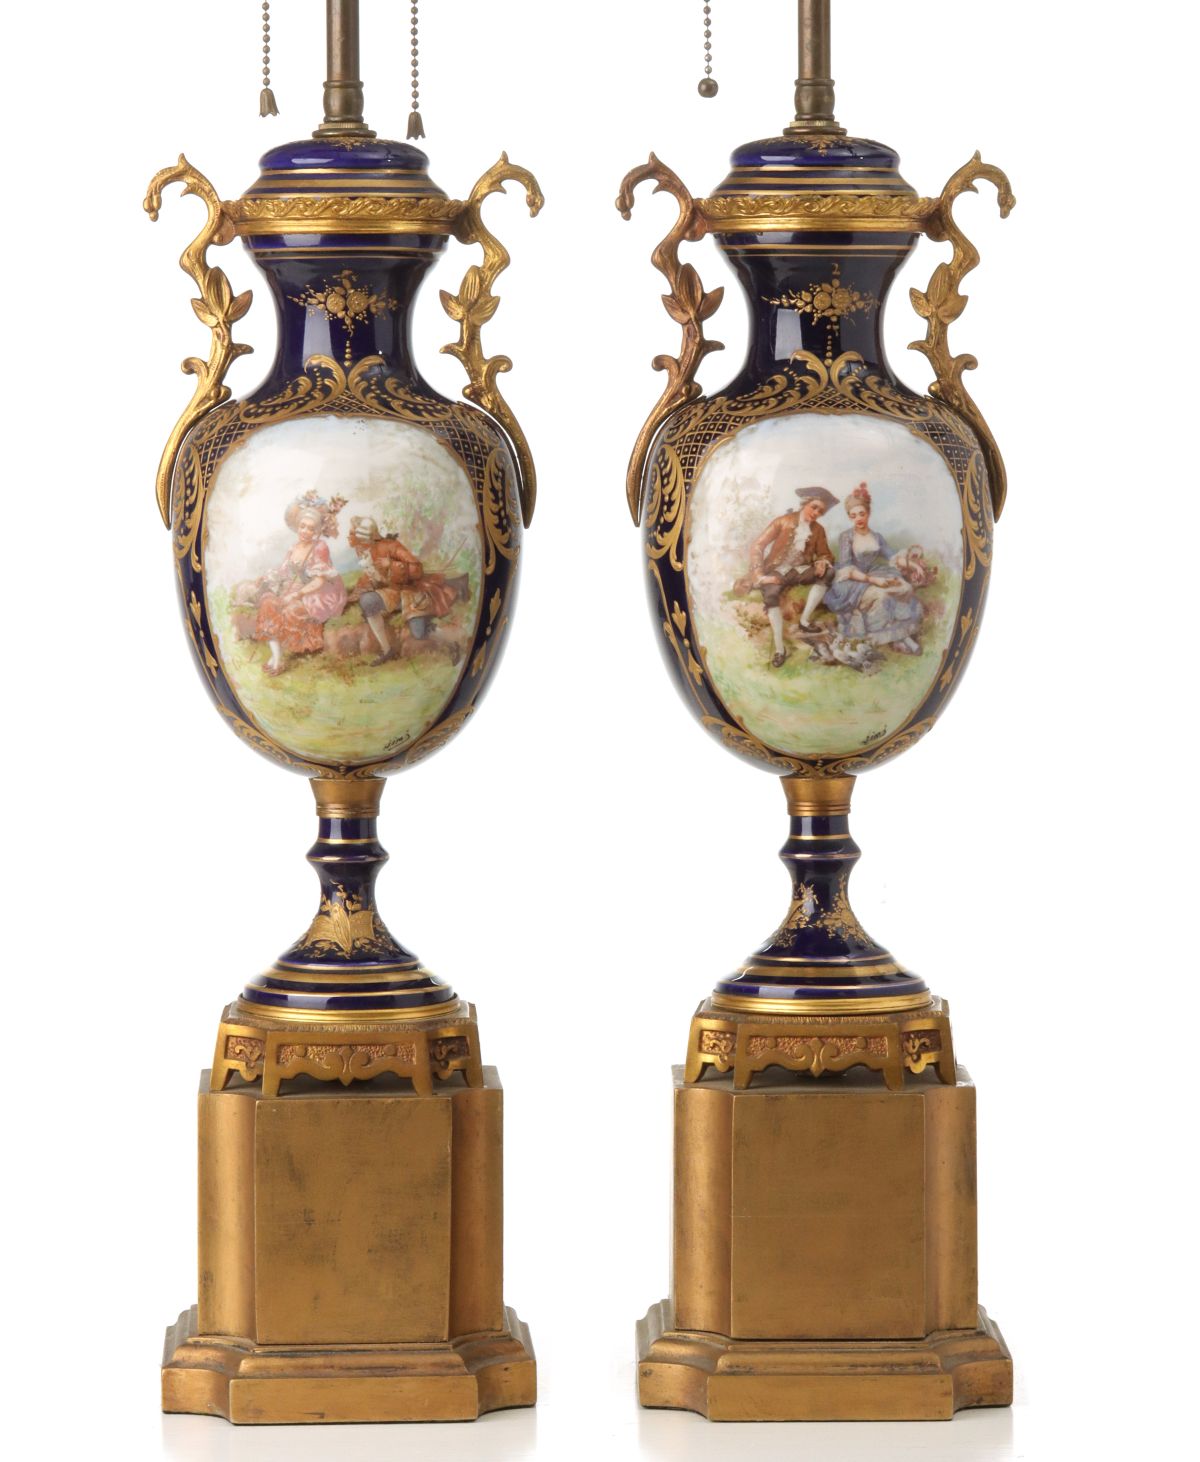 A PAIR 19TH C. FRENCH GILT BRONZE AND PORCELAIN LAMPS